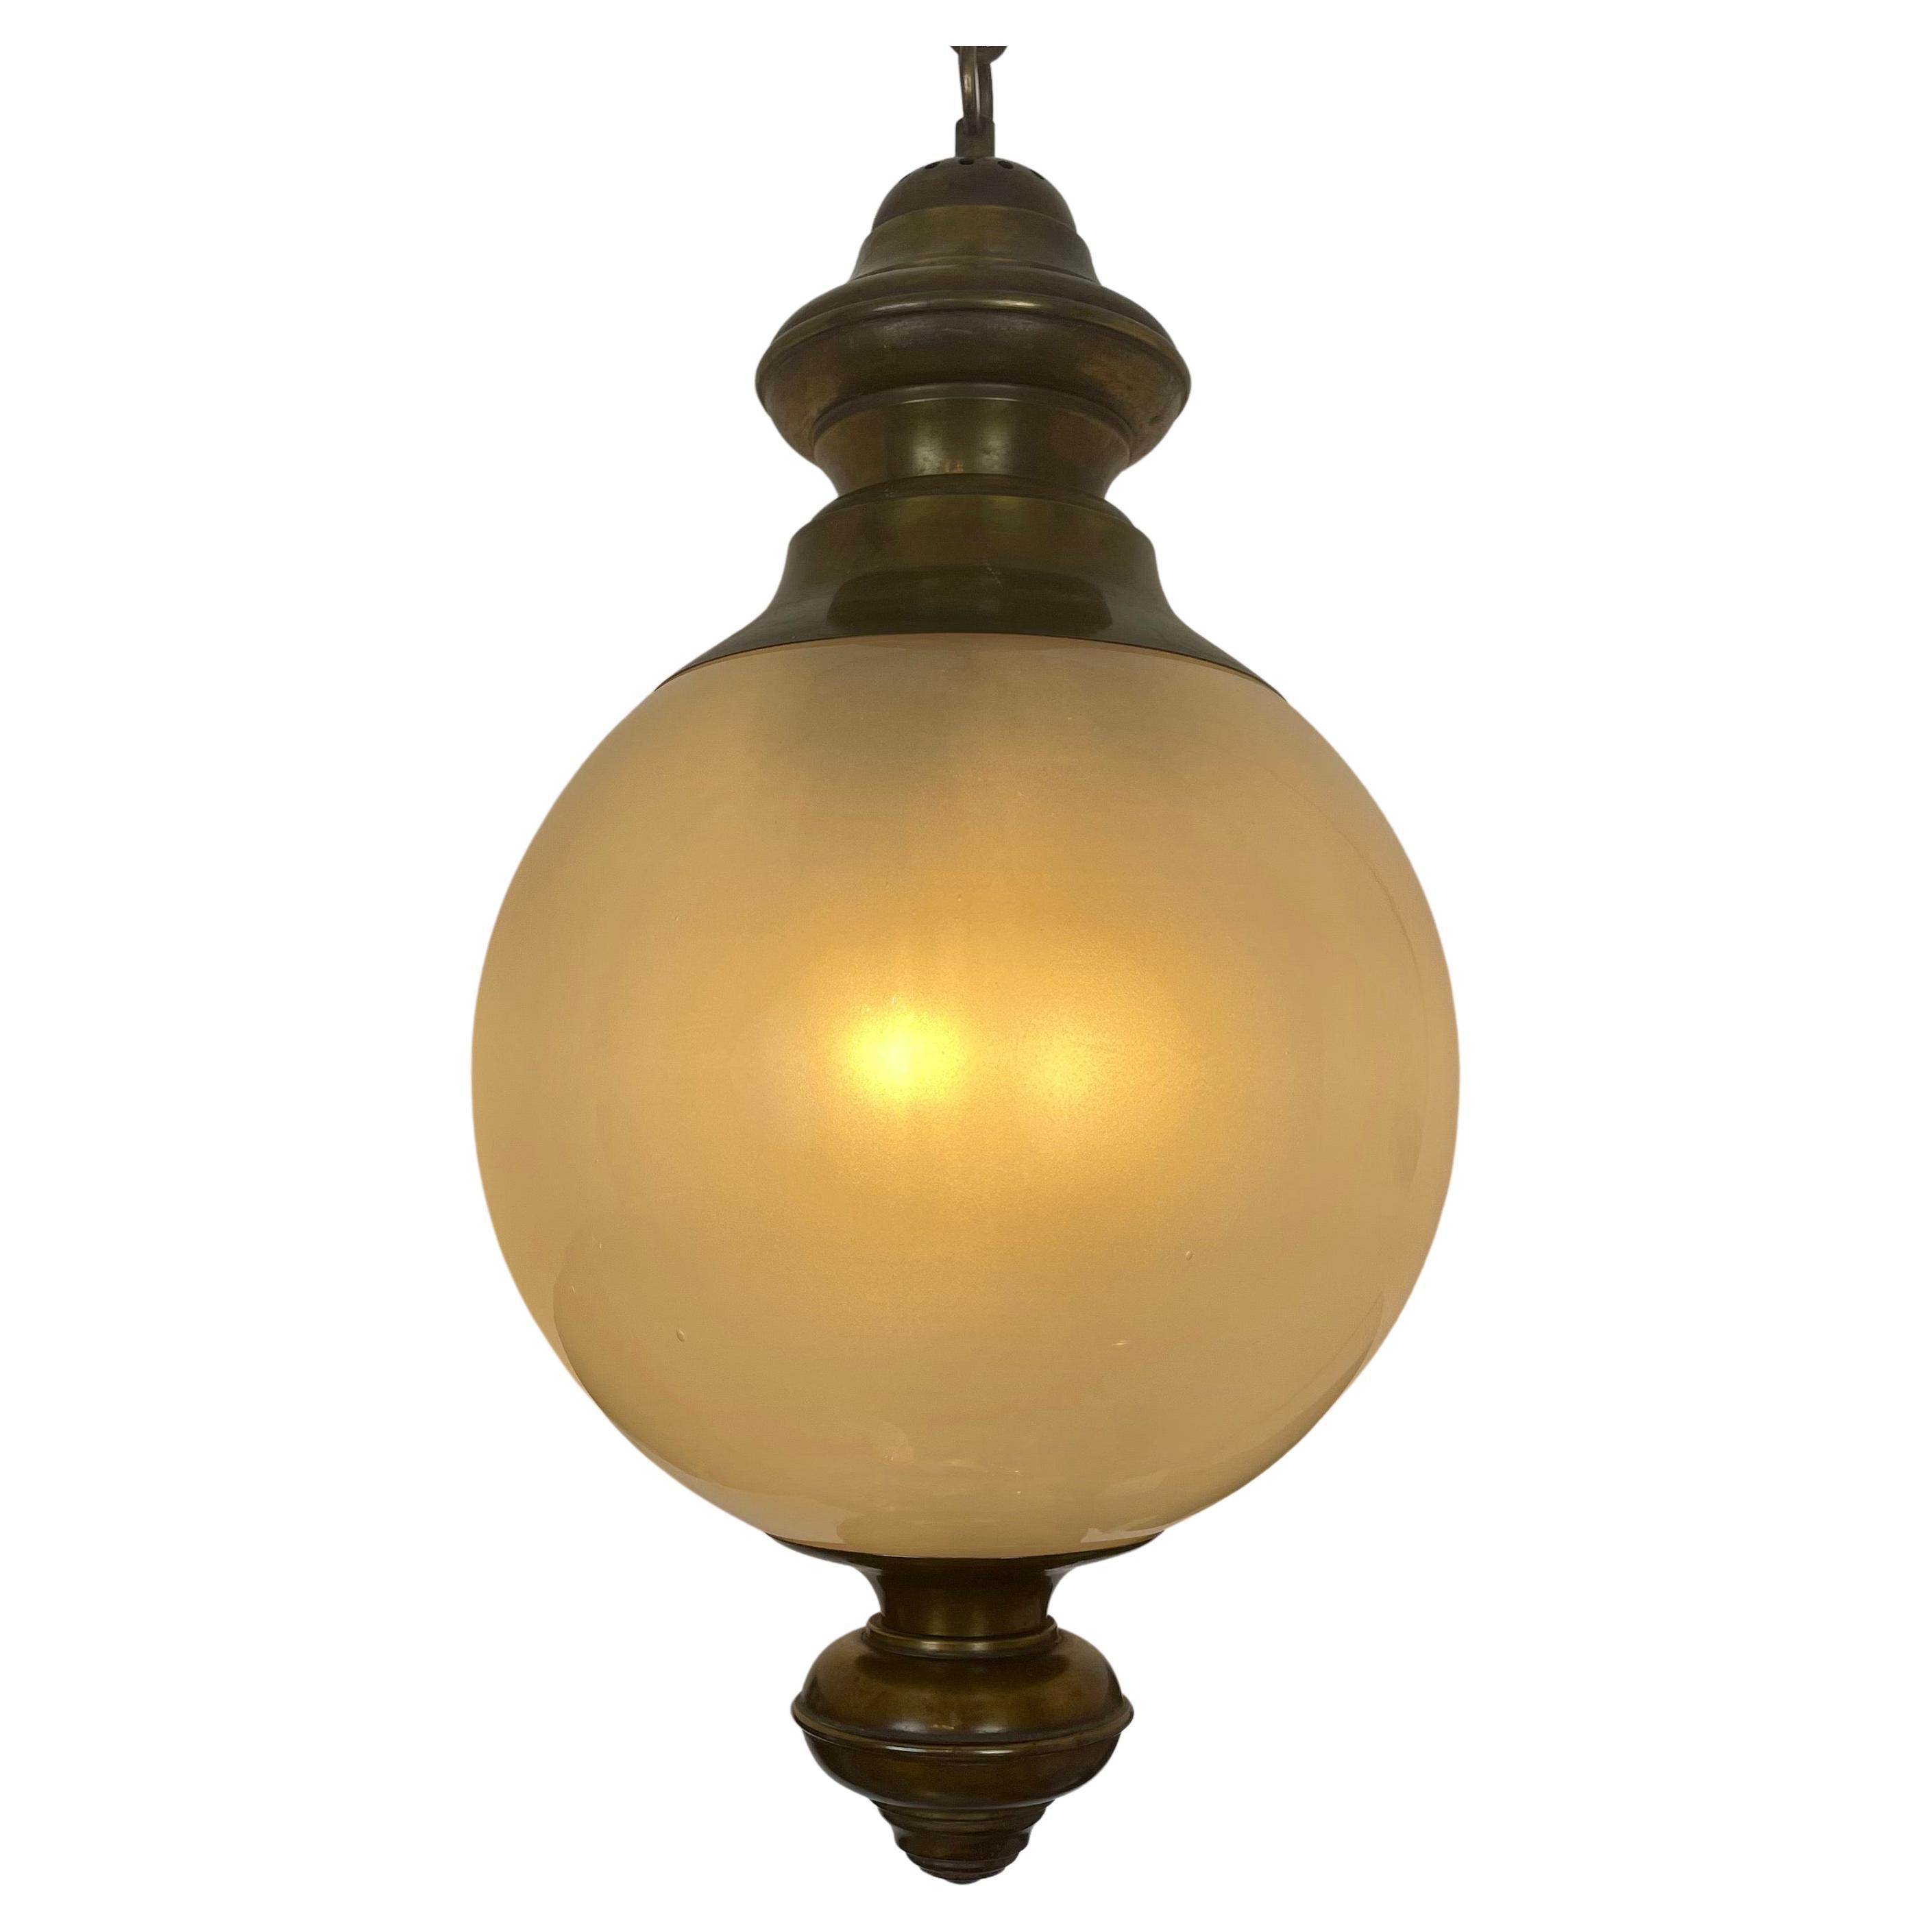 Luigi Caccia Dominioni (Milan 1913-2016) Chandelier for Azucena circa 1960, a circular brass mount and a sphere of Murano hand blown opalescent, frosted glass  Italian pendant. .Good condition, no cracks, working with three E14 lights inside the